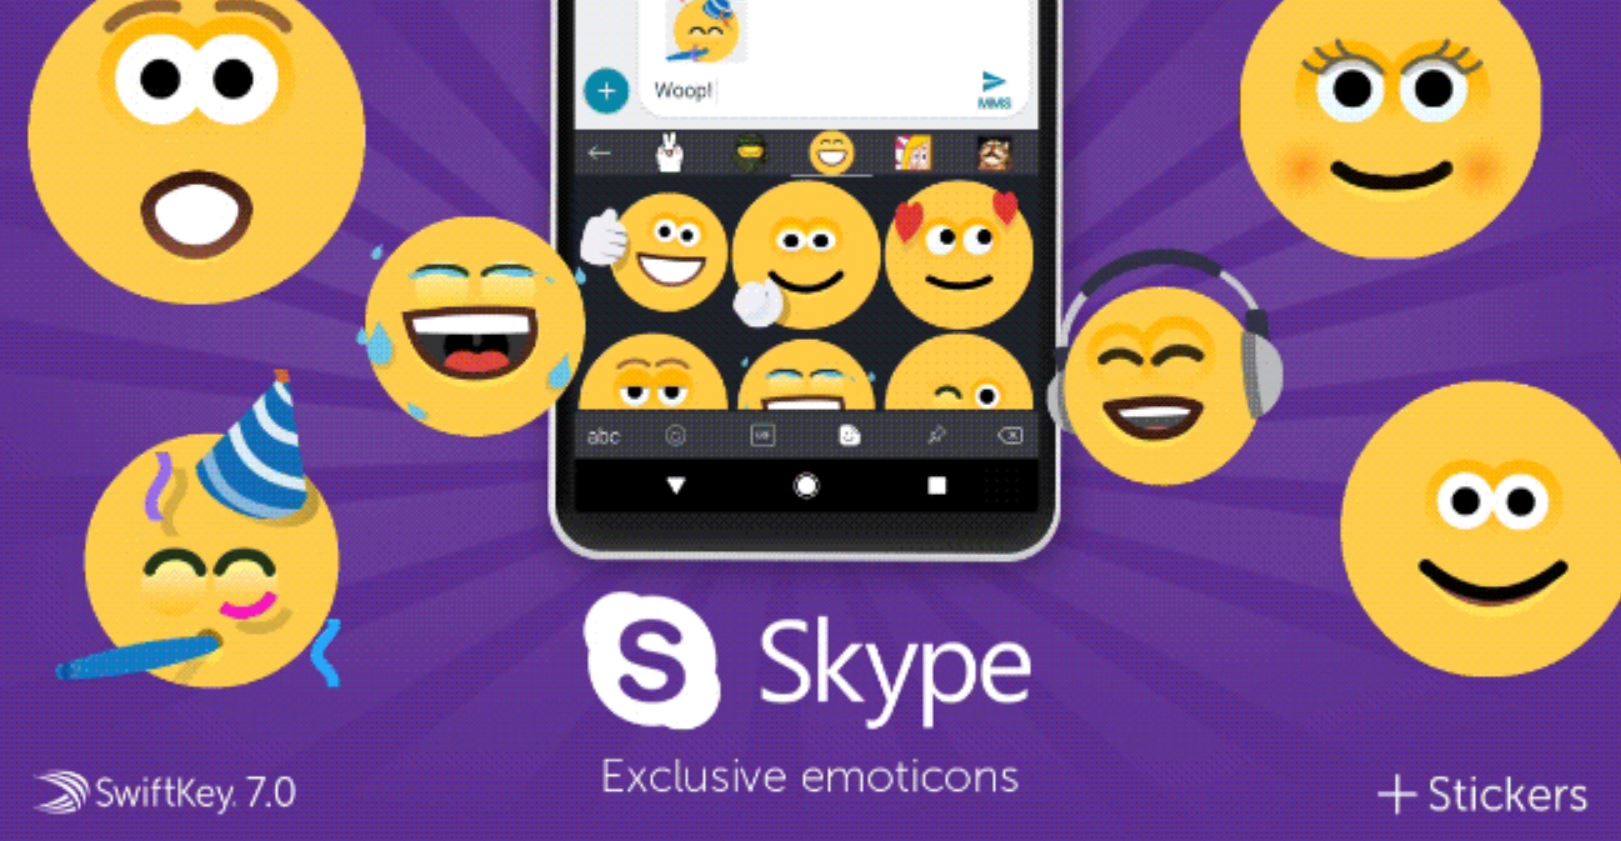 SwiftKey for Android updated with Halo Sticker pack and Skype emoticons